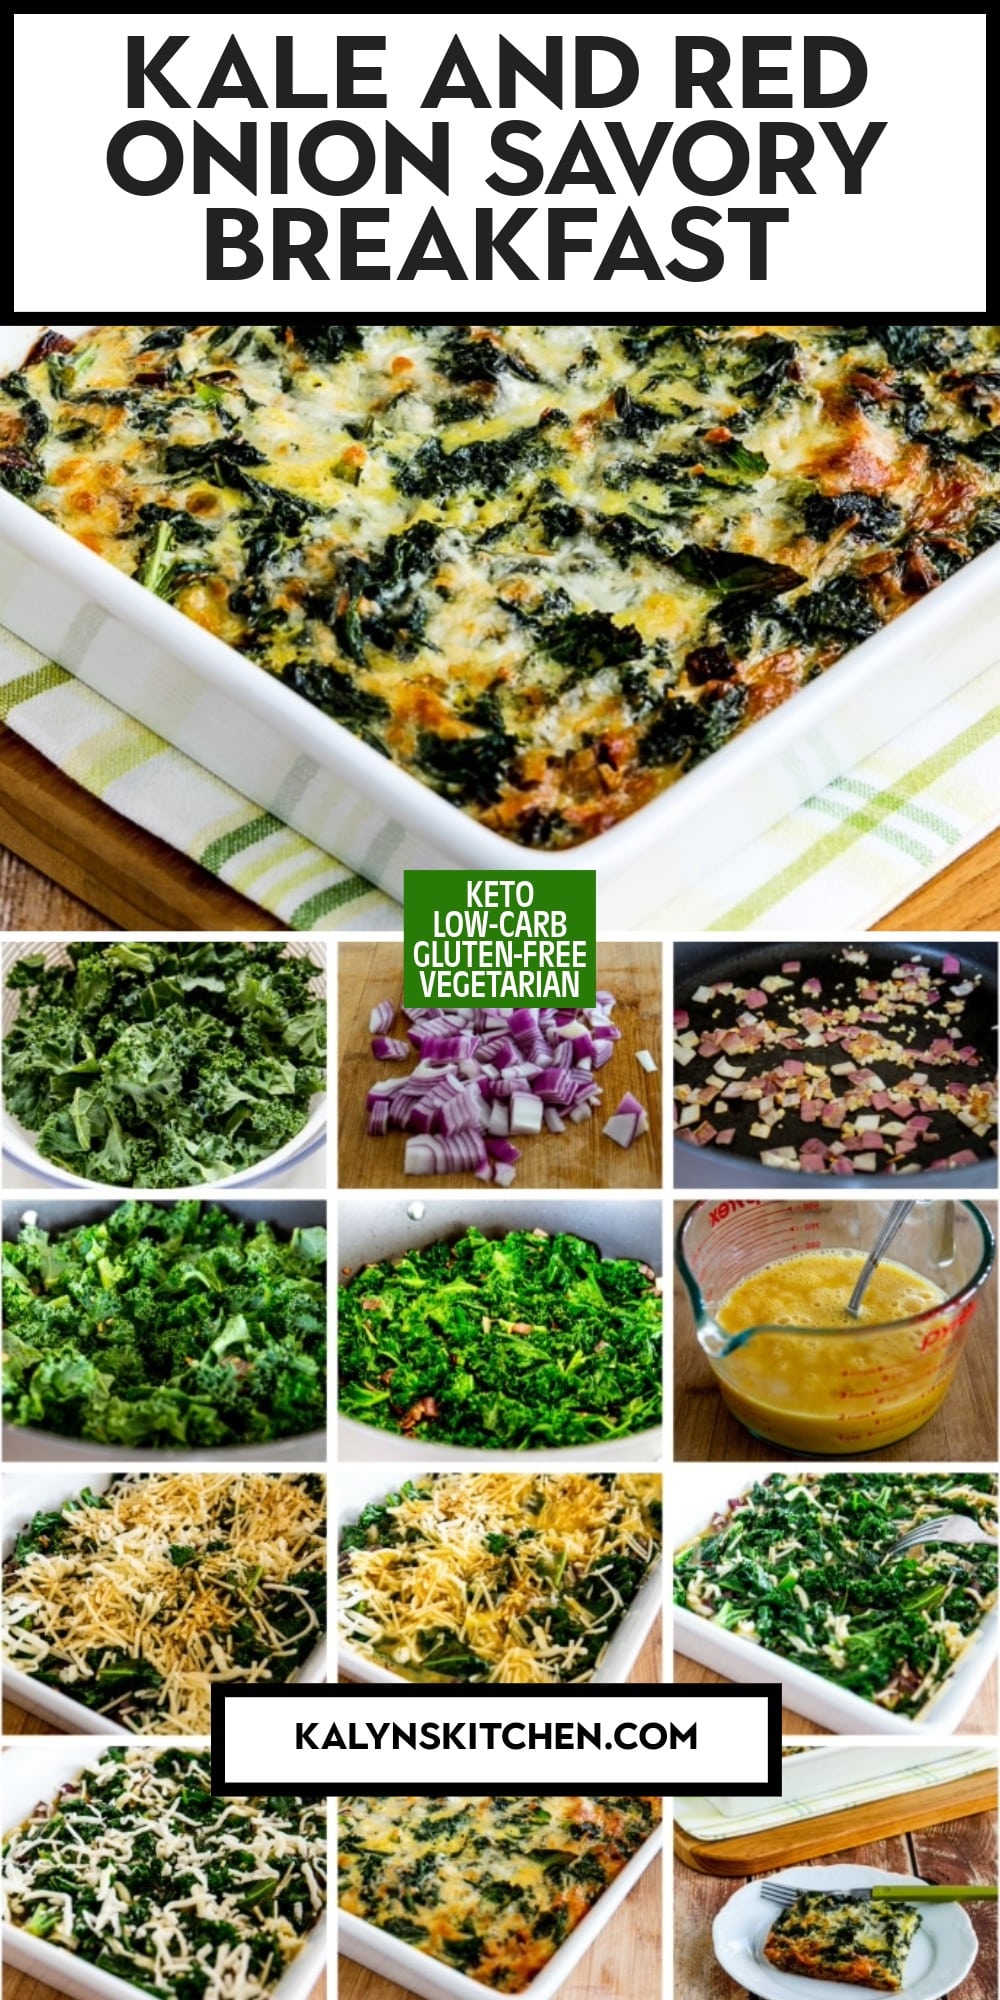 Pinterest image of Kale and Red Onion Savory Breakfast